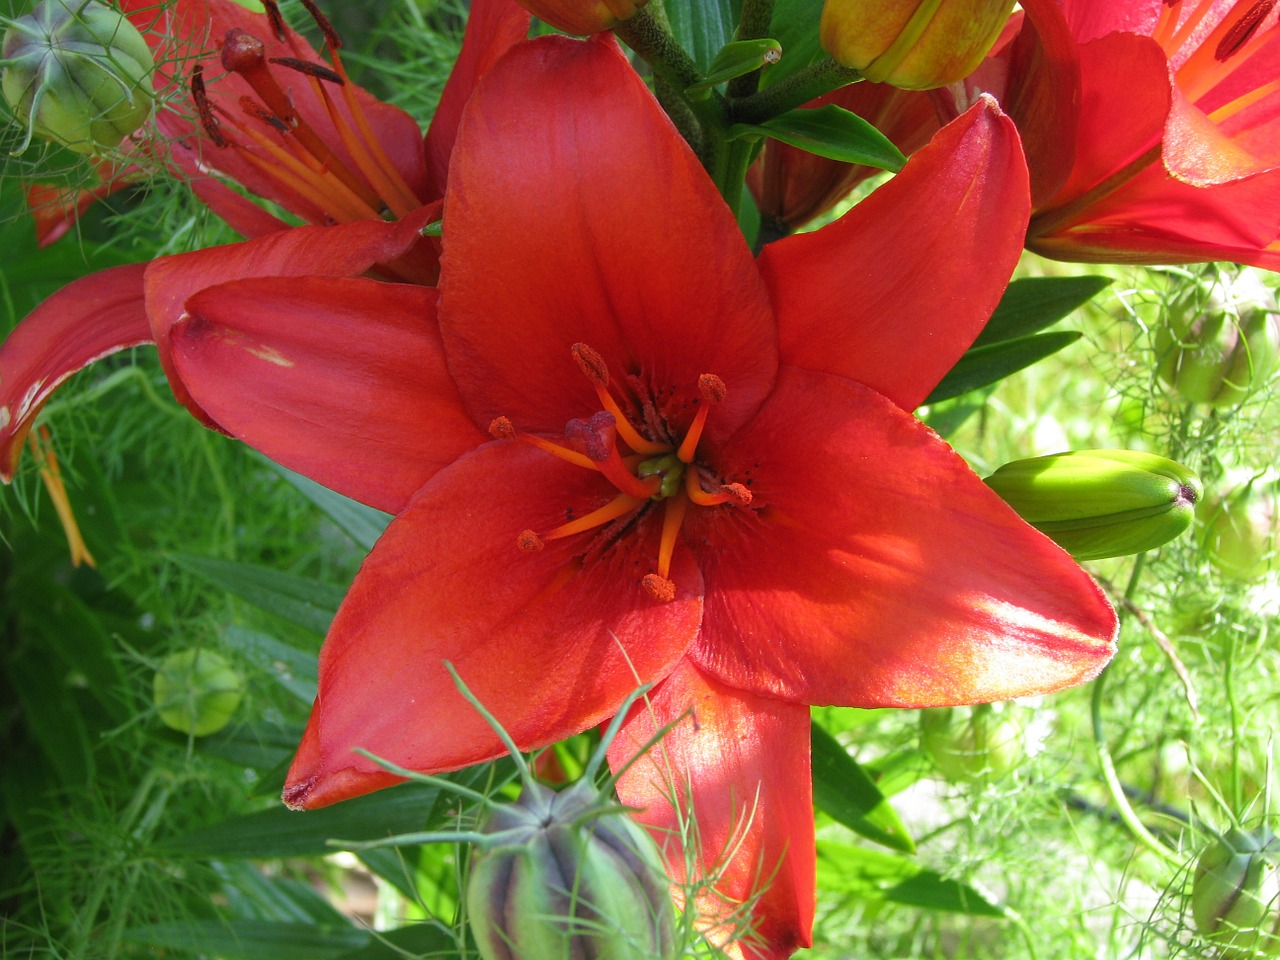 lily flower red free photo